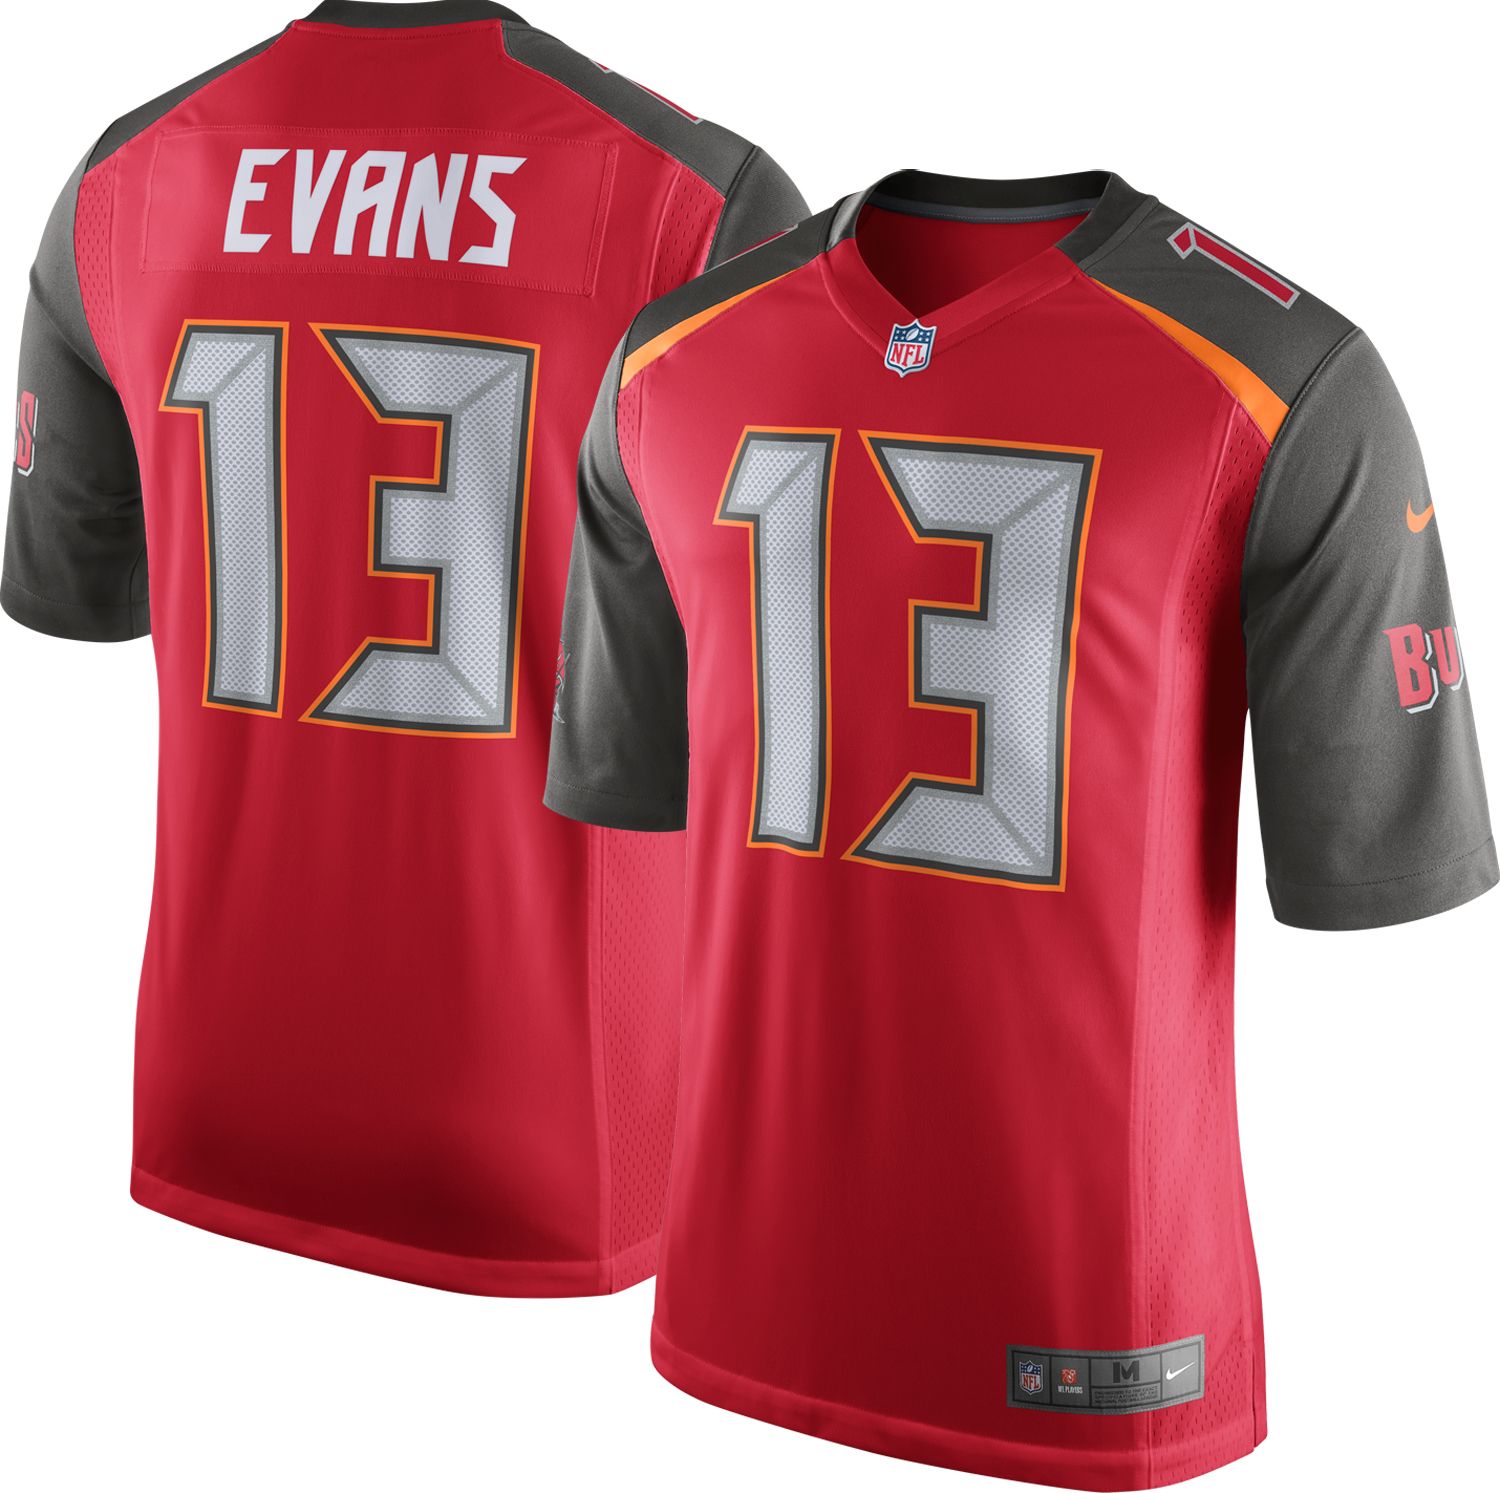 tampa bay buccaneers stitched jerseys